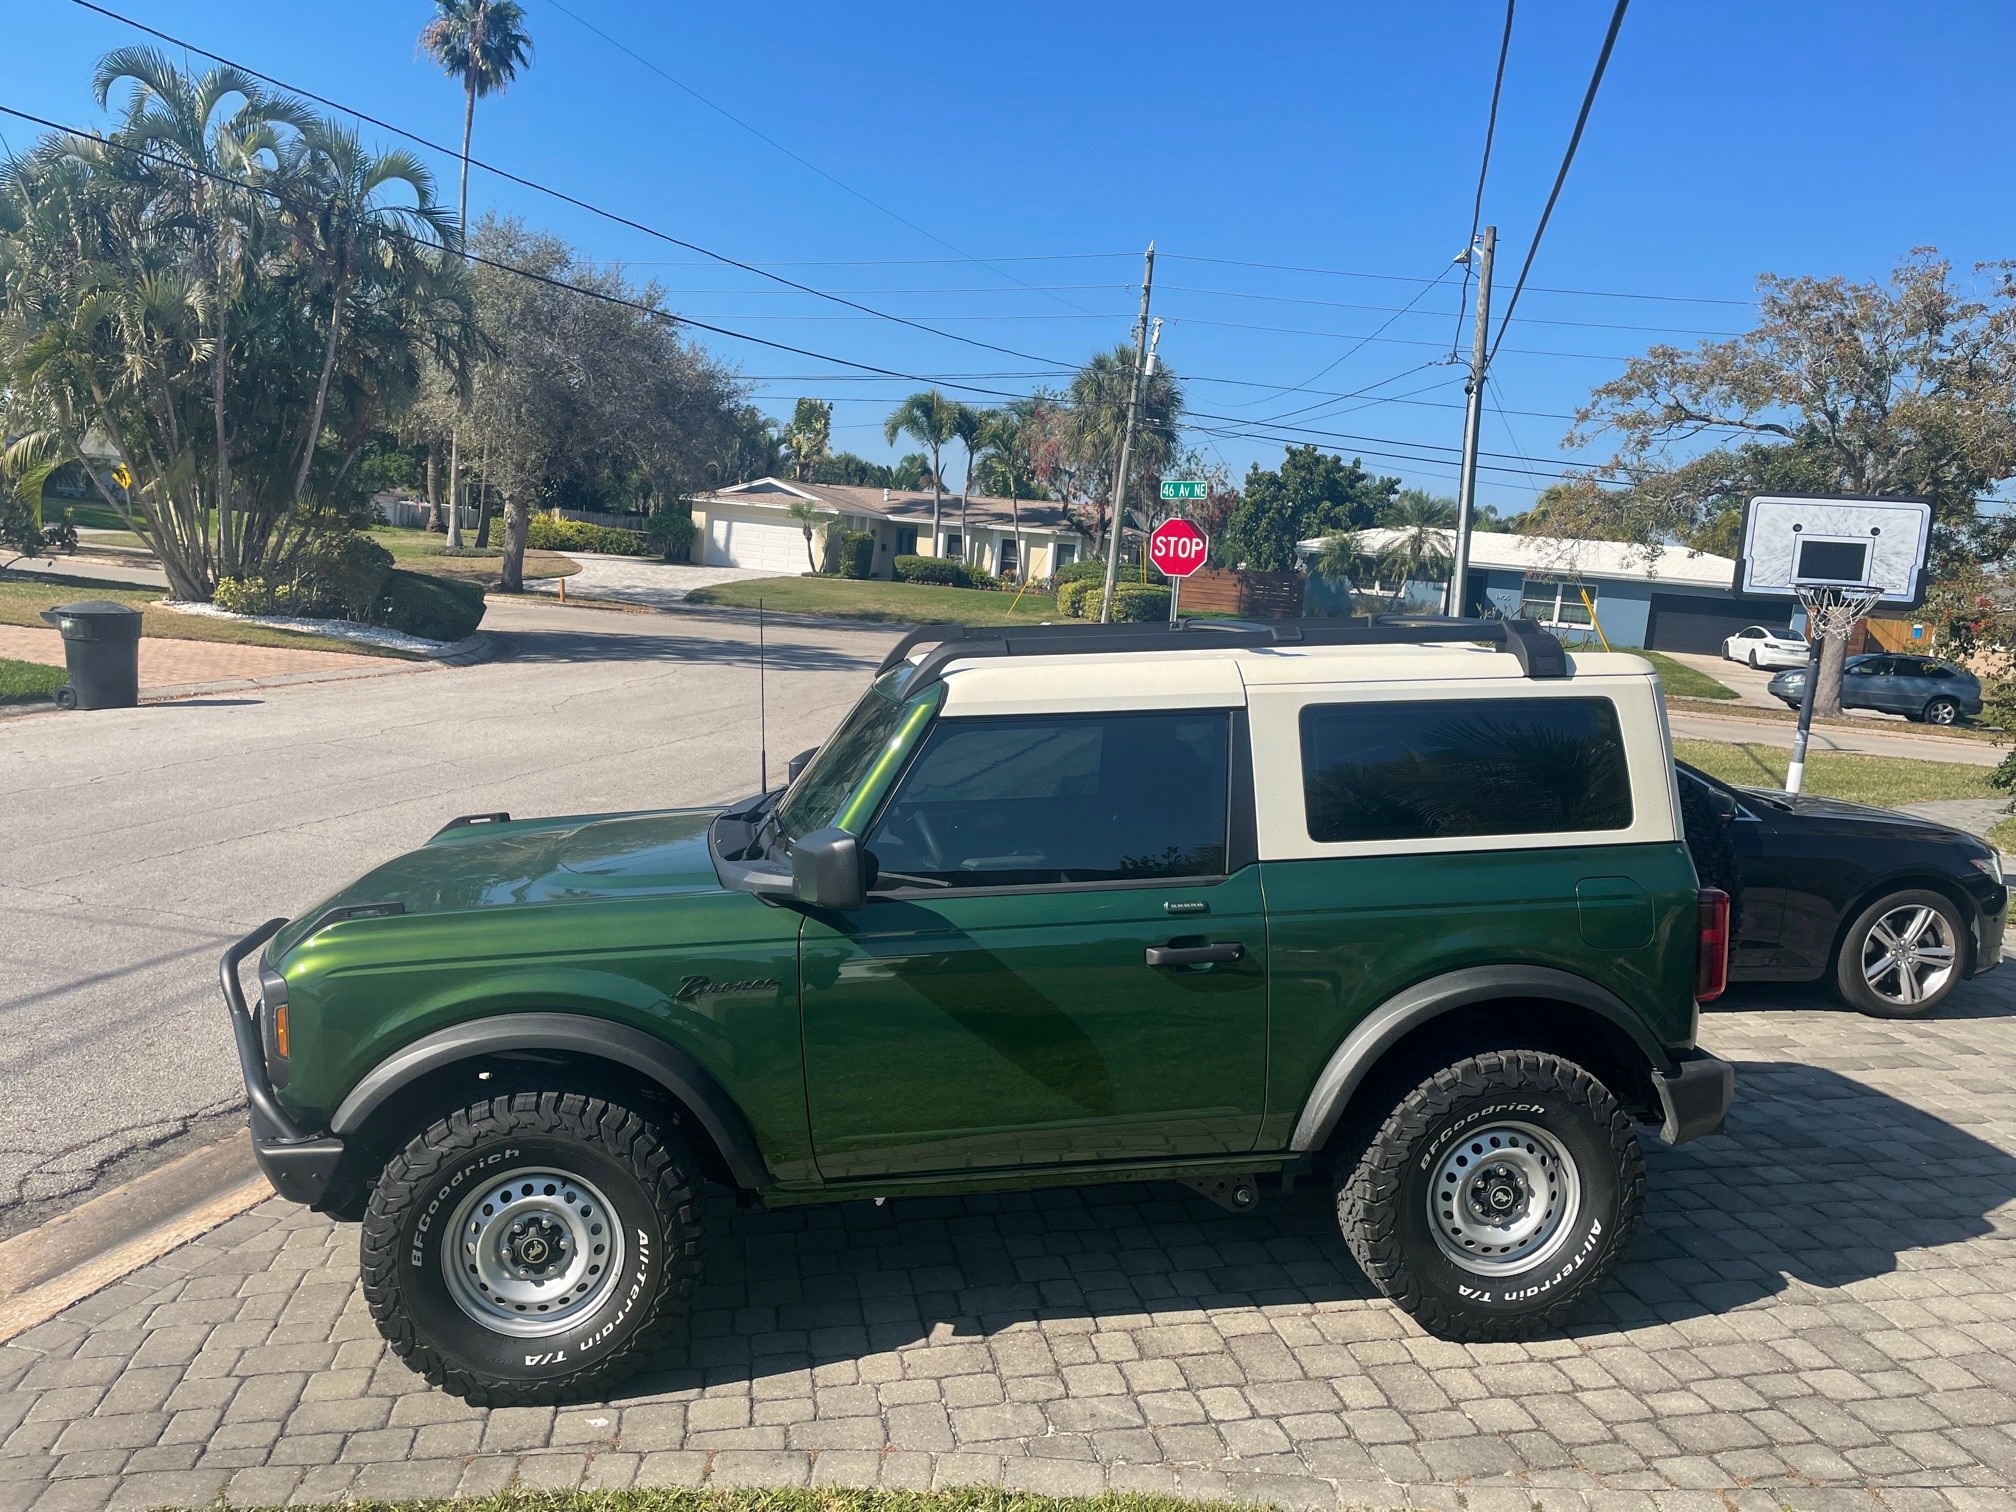 Ford Bronco Base Eruption Green & Line-X White Top Throwback Build, keeping the Steelies Rack2